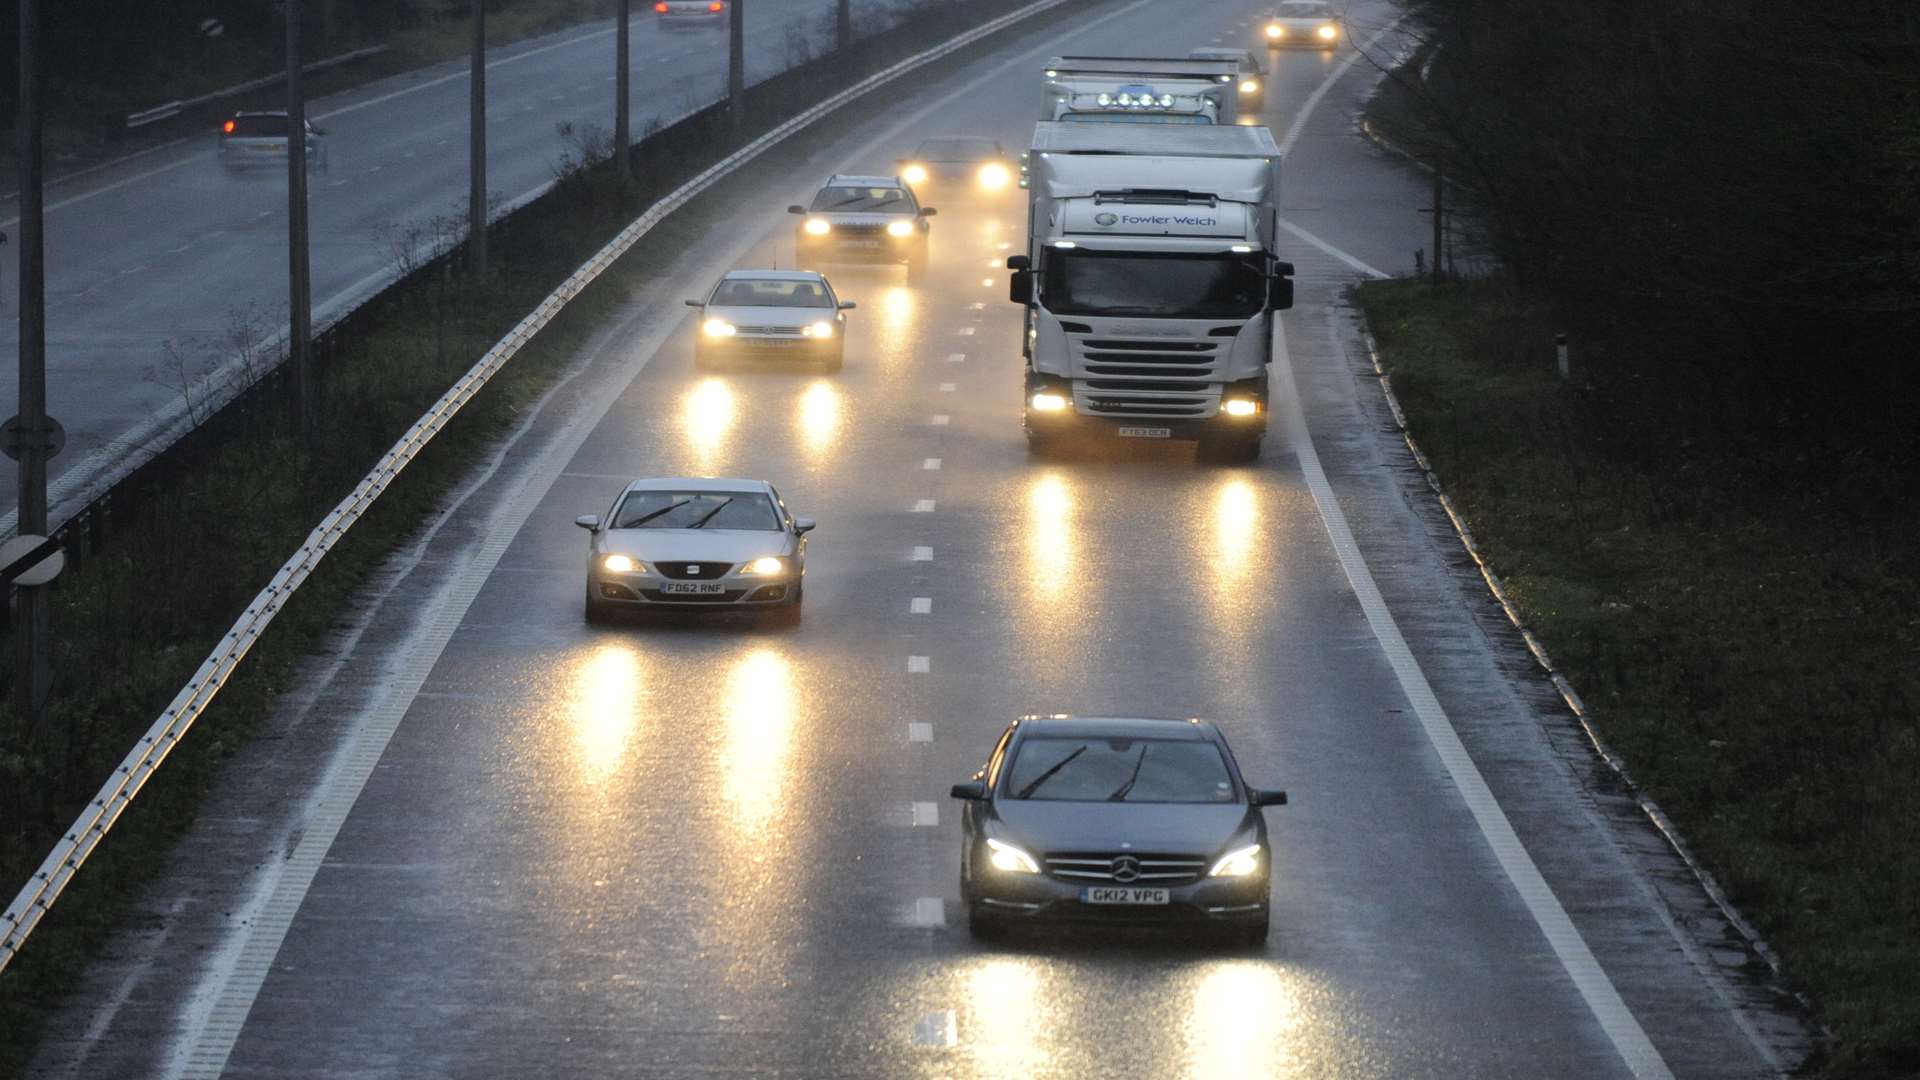 Rain has battered the A2 this week